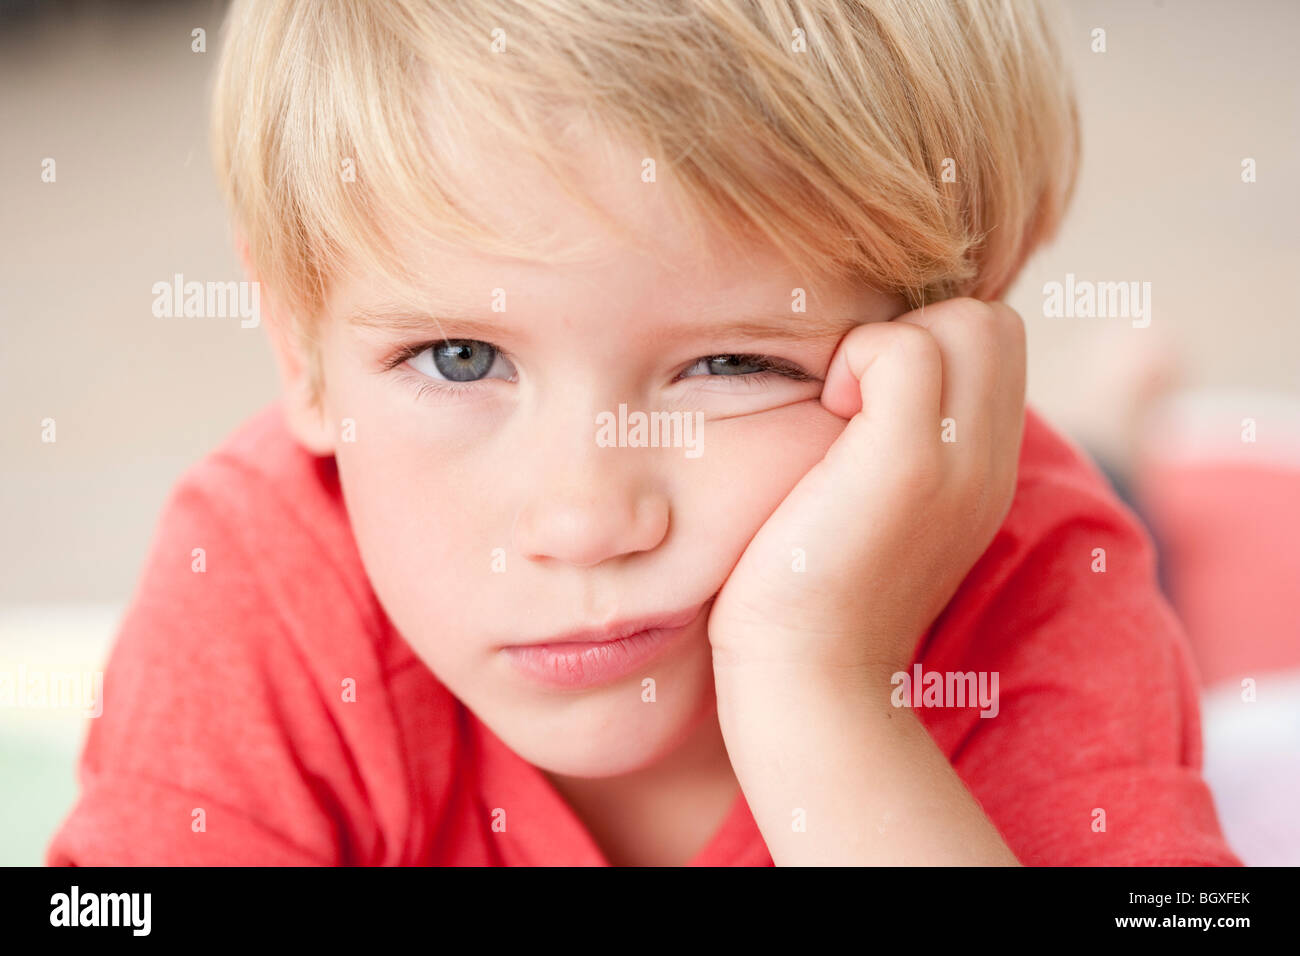 young boy looking bored at viewer Stock Photo